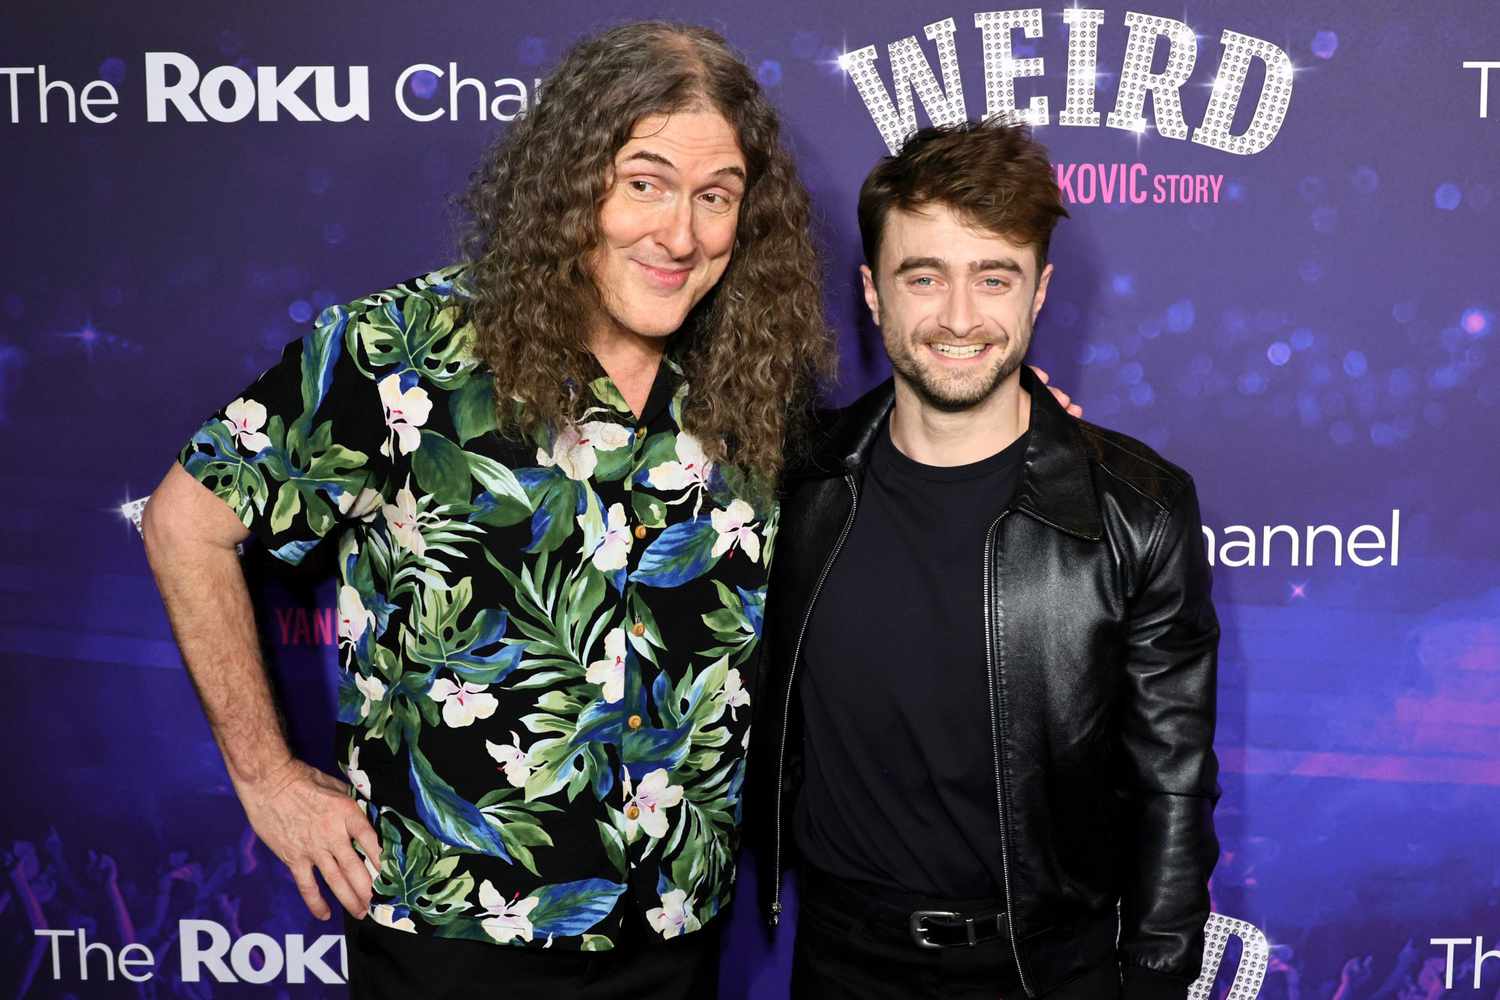 NEW YORK, NEW YORK - NOVEMBER 01: "Weird Al" Yankovic and Daniel Radcliffe attend the "Weird: The Al Yankovic Story" New York Premiere at Alamo Drafthouse Cinema on November 01, 2022 in New York City. (Photo by Theo Wargo/Getty Images)